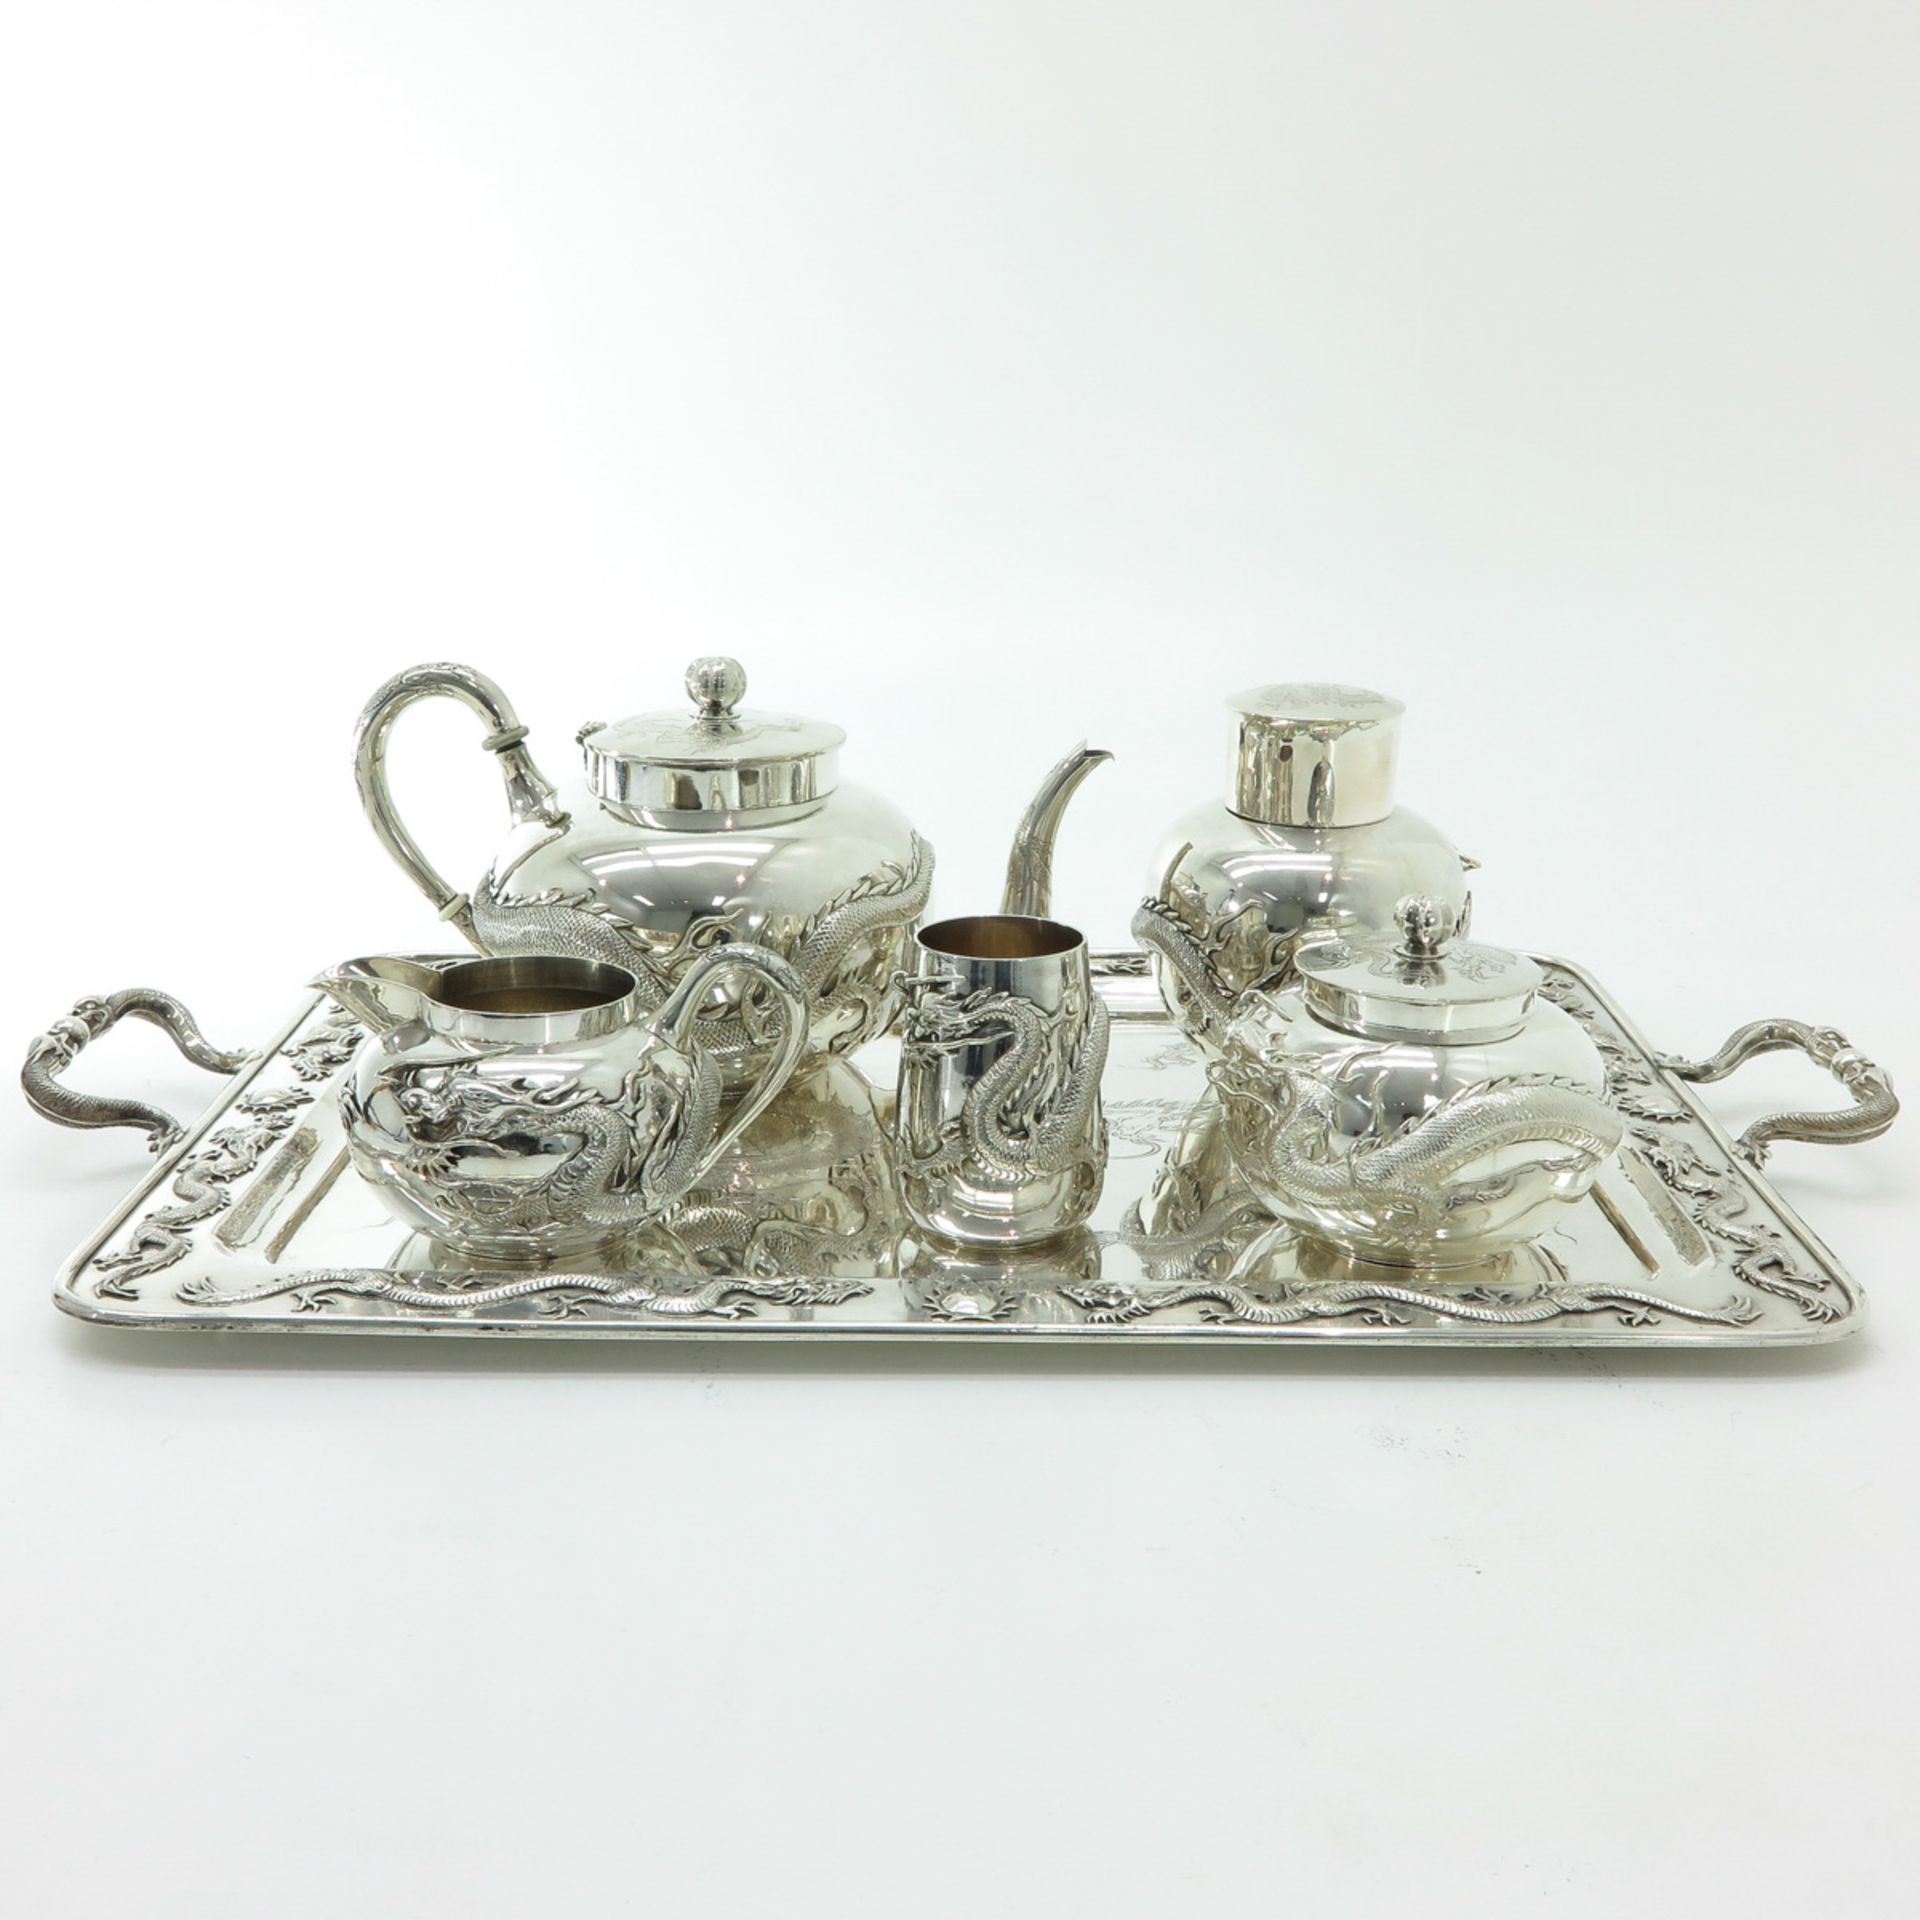 A Chinese Silver Tea Service